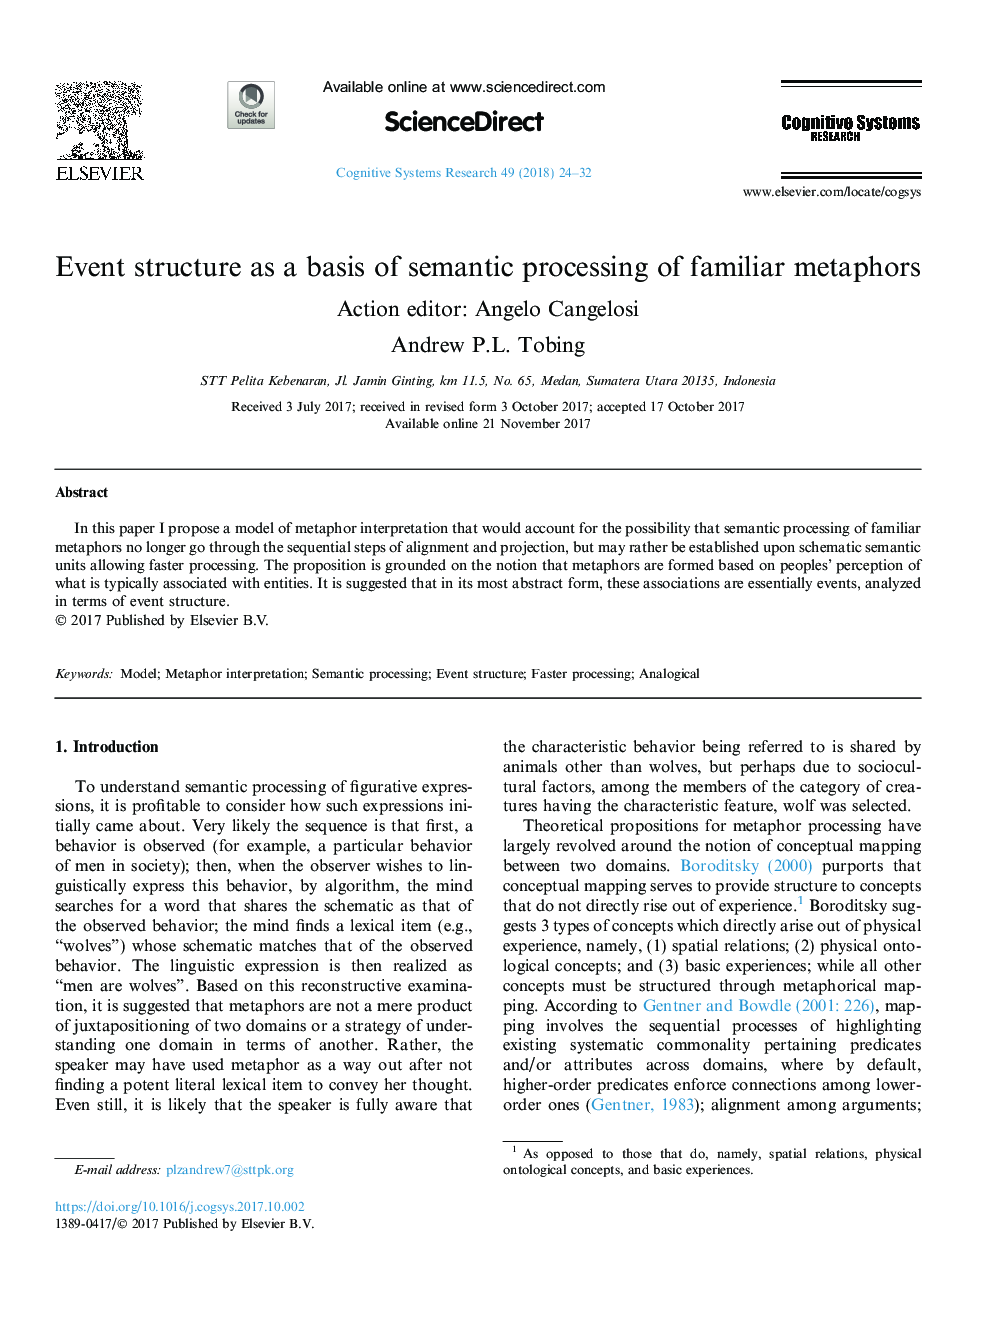 Event structure as a basis of semantic processing of familiar metaphors